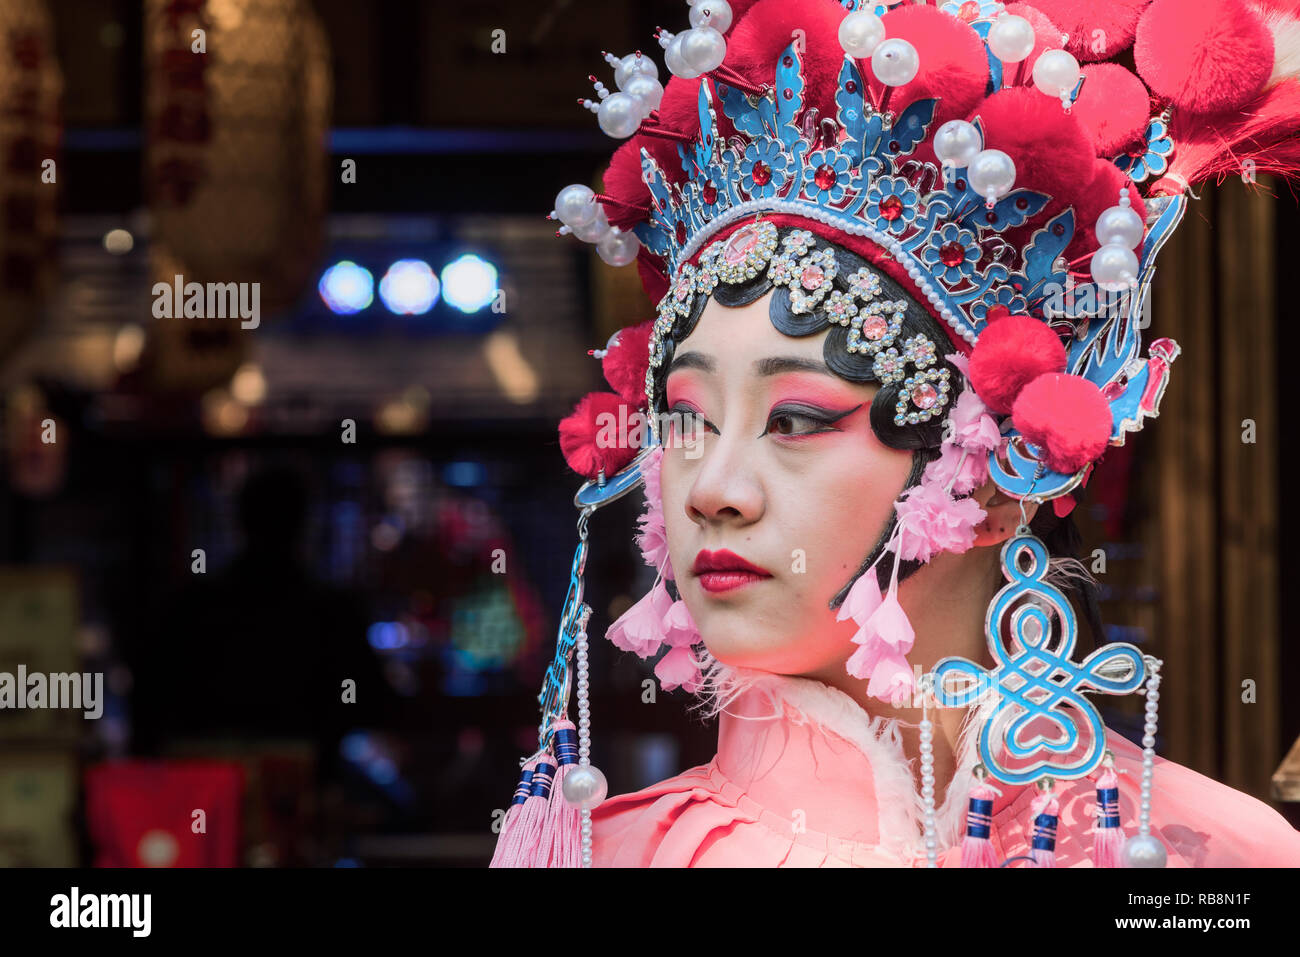 Chengdu, Sichuan Province, China - Nov 18, 2018 : Portrait of a yound woman dressed in Sichuan Opera traditional costume in Jinli street touristic area. Stock Photo